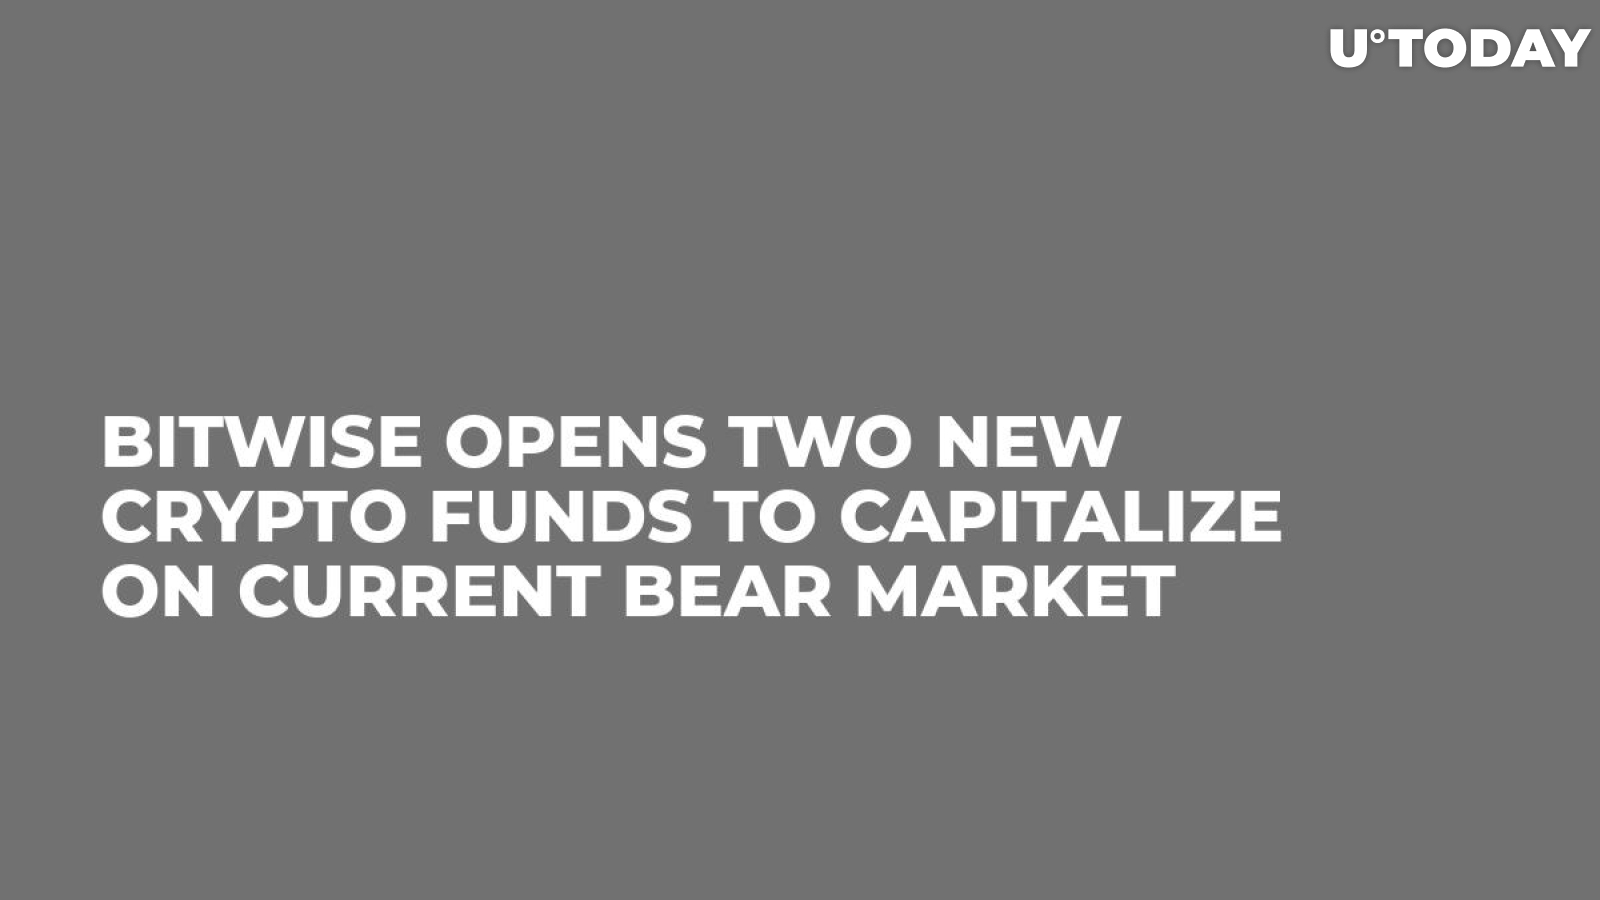 Bitwise Opens Two New Crypto Funds to Capitalize on Current Bear Market 